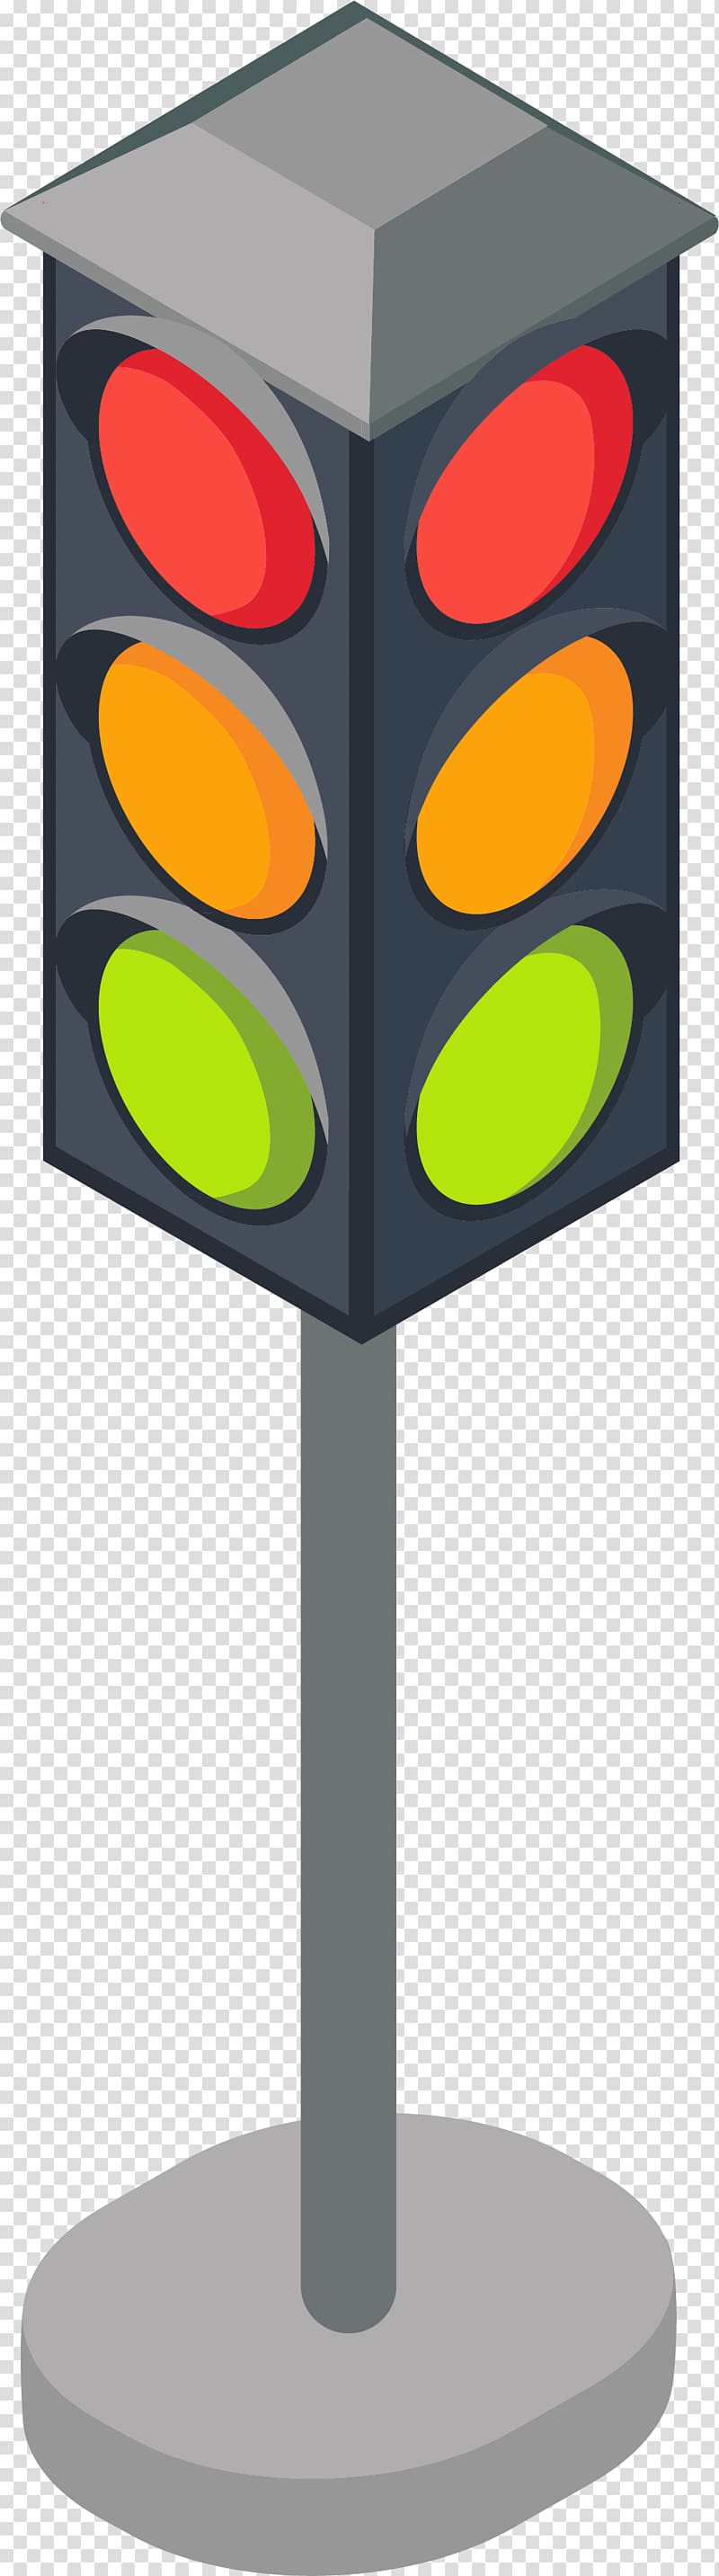 Traffic light Cartoon , Cartoon traffic light transparent background PNG clipart